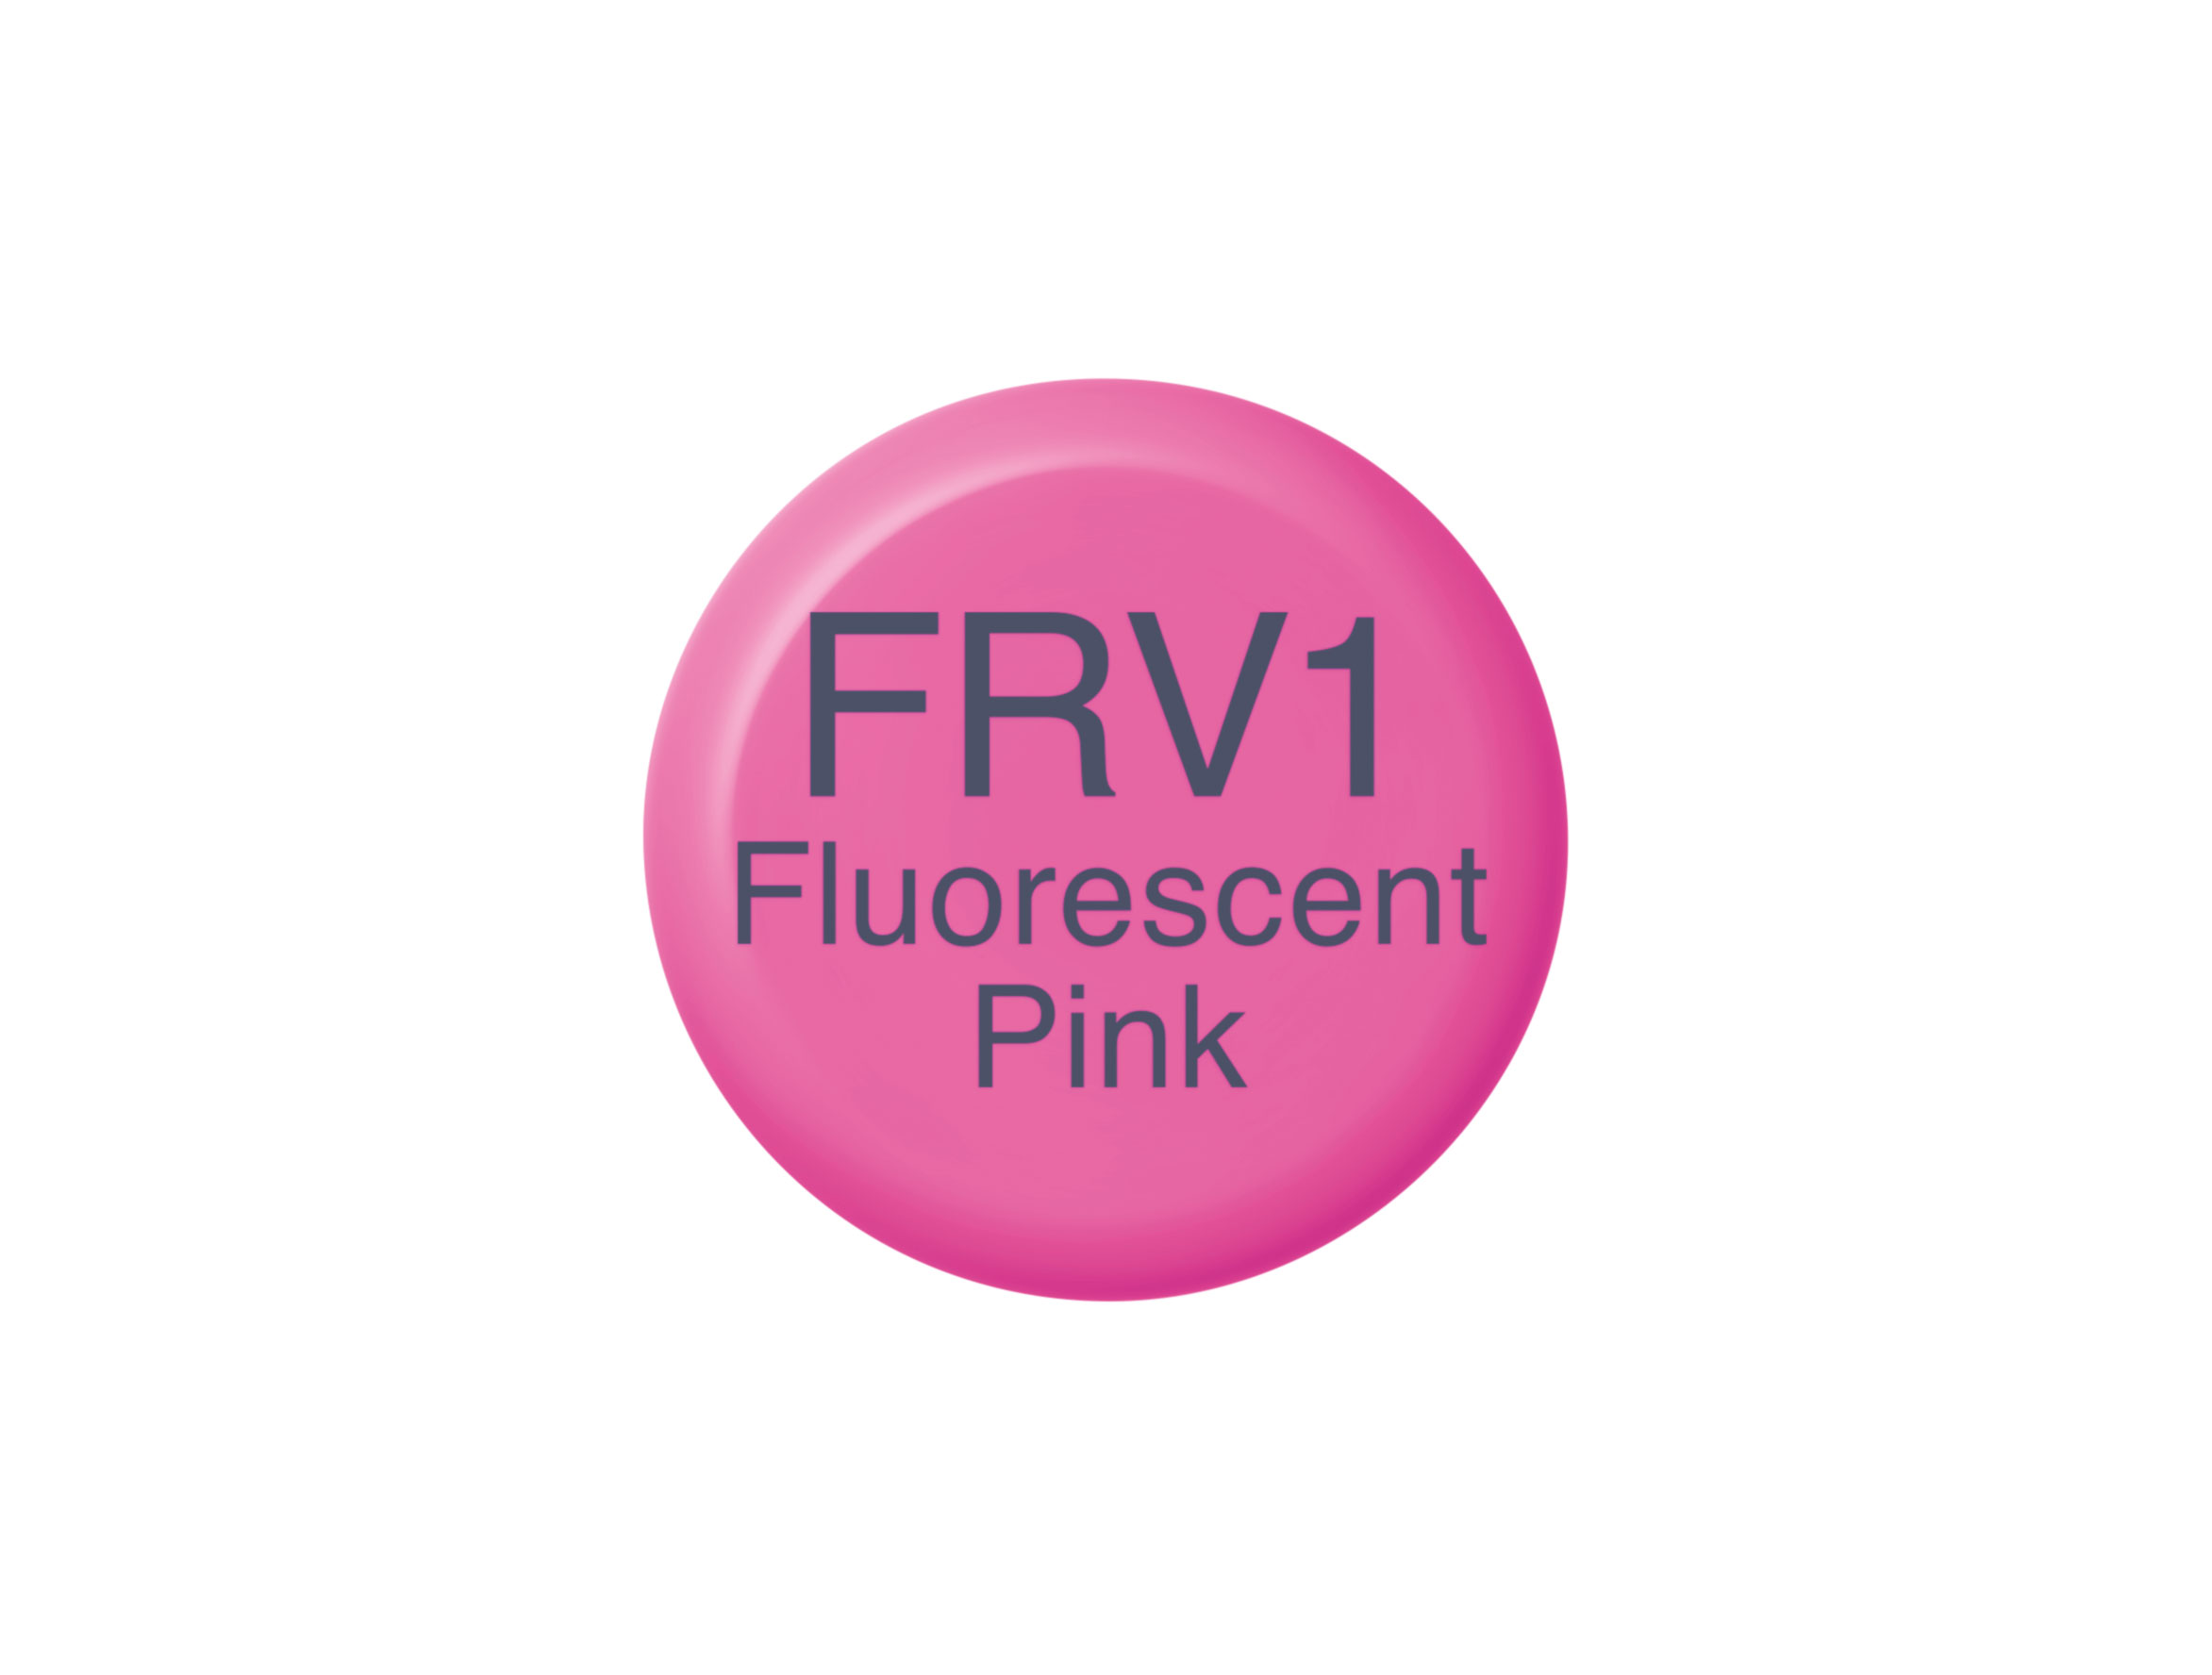 Copic Ink FRV (FRV1) Fluorescent Pink